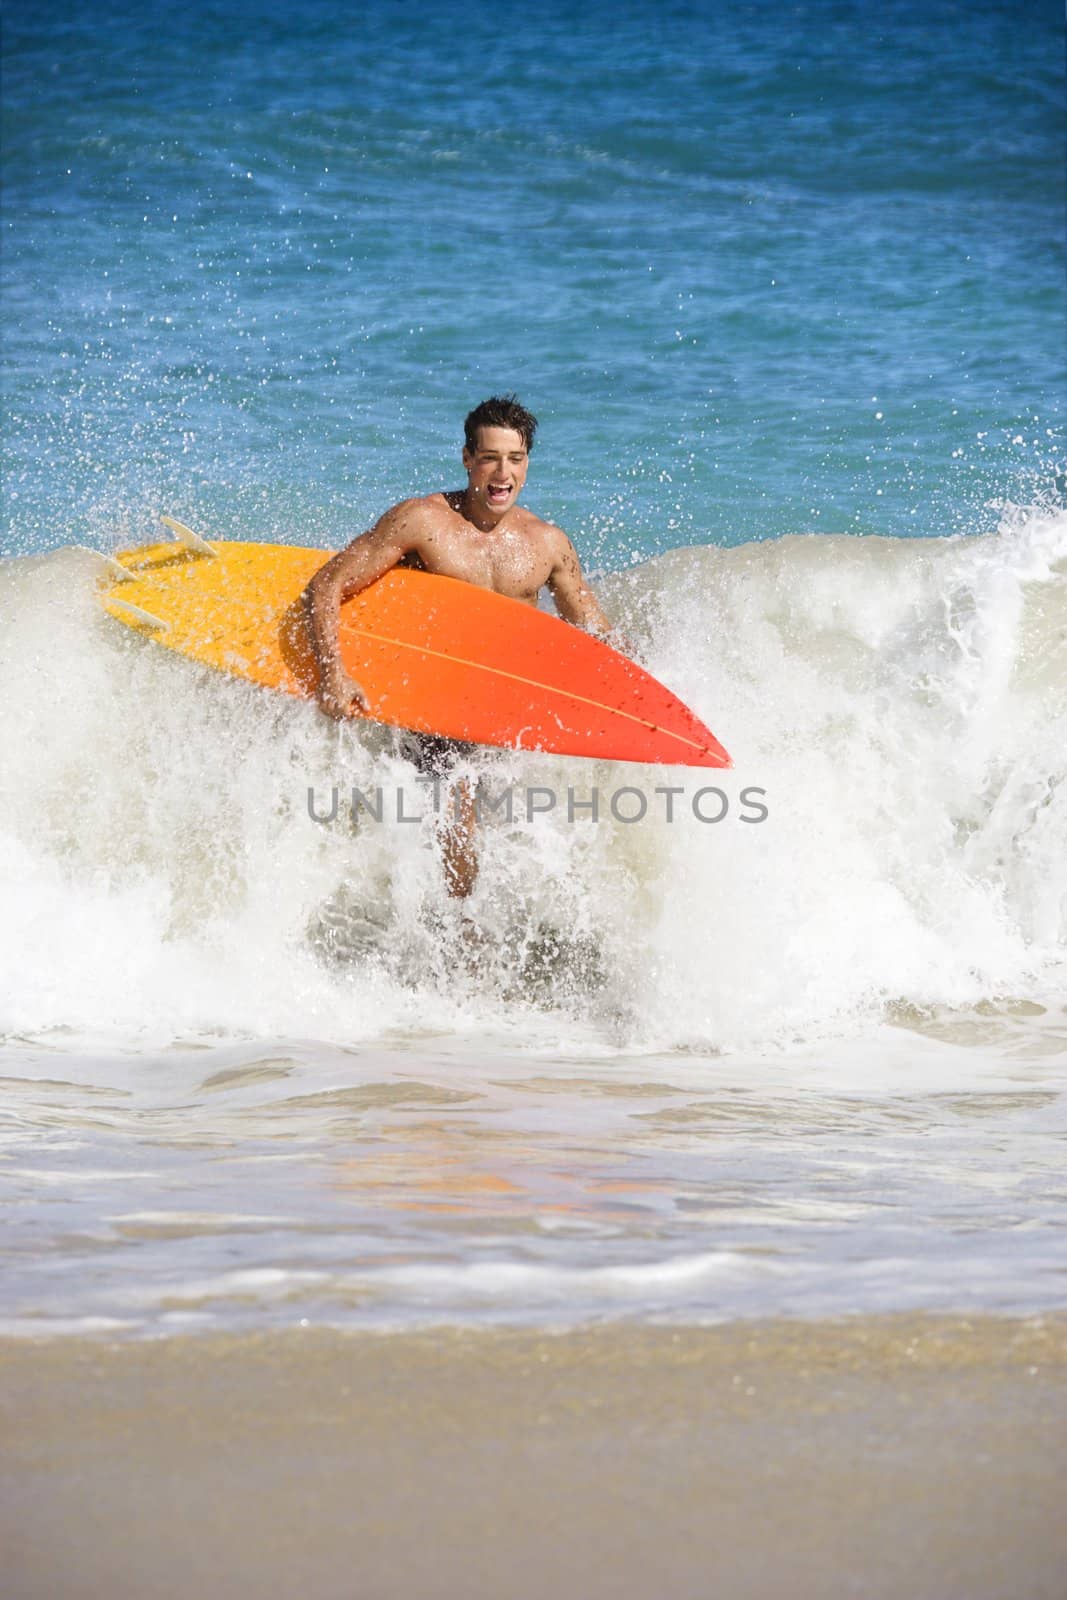 Attractive young man running out of water carrying surfboard in Maui, Hawaii.